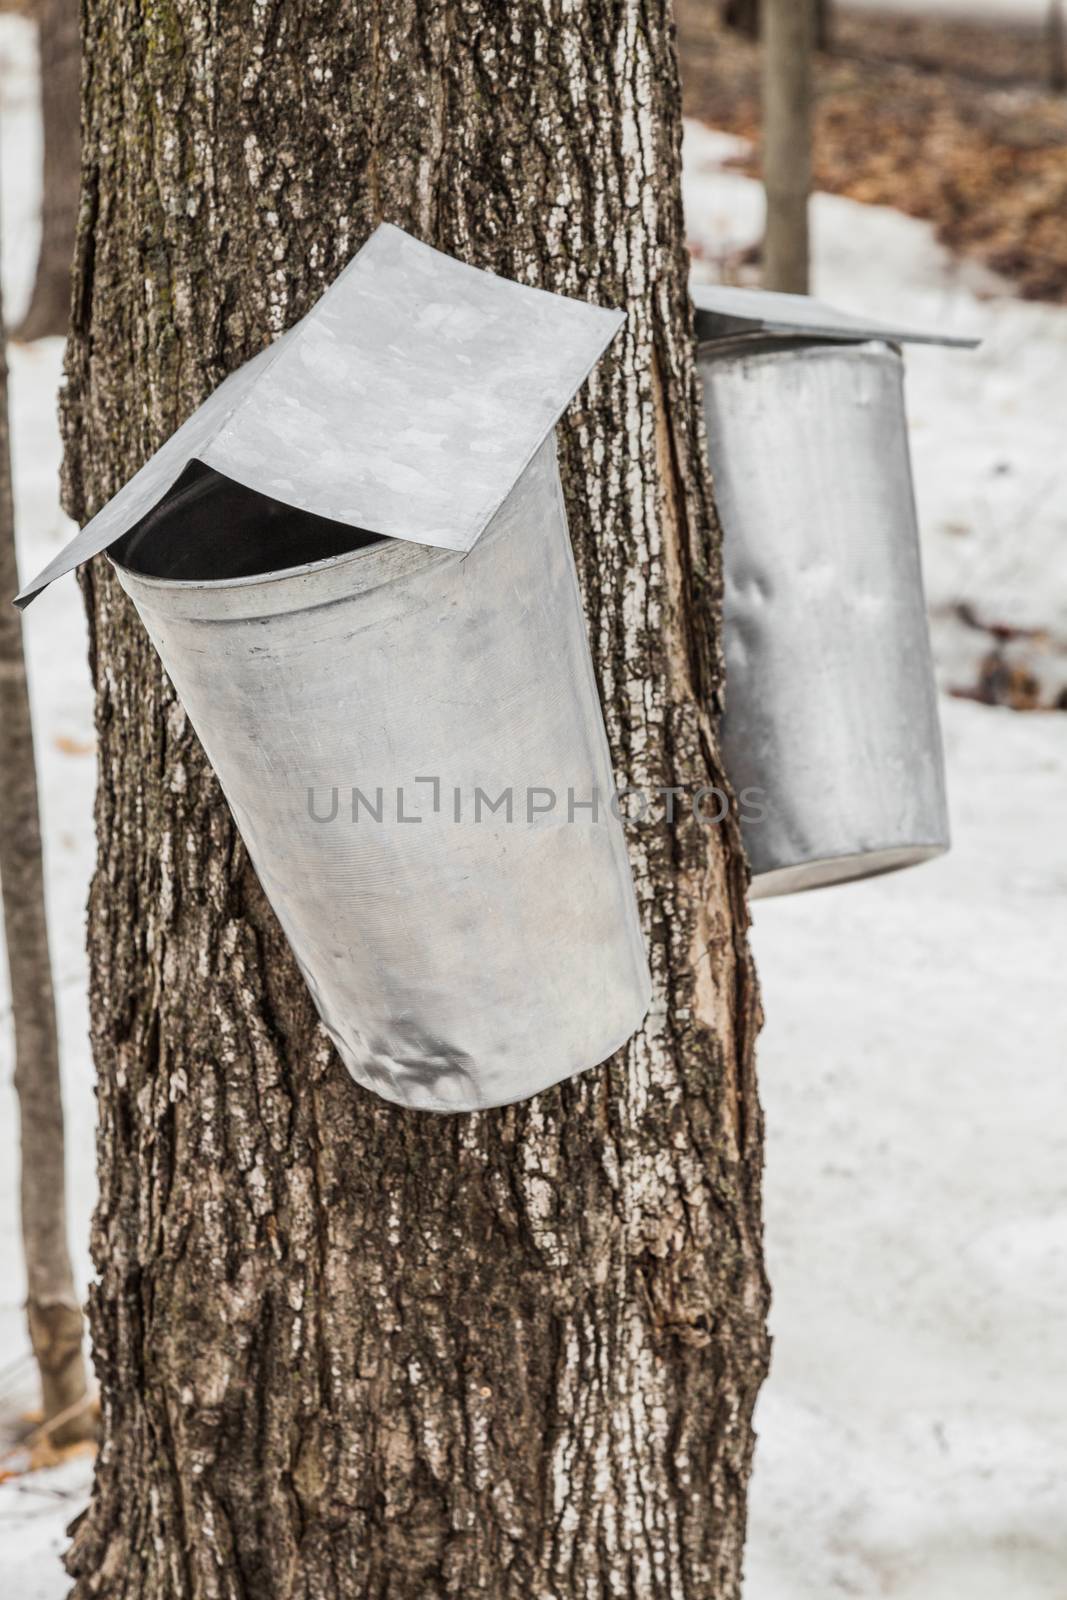 Maple Sap buckets Closeup on trees in spring